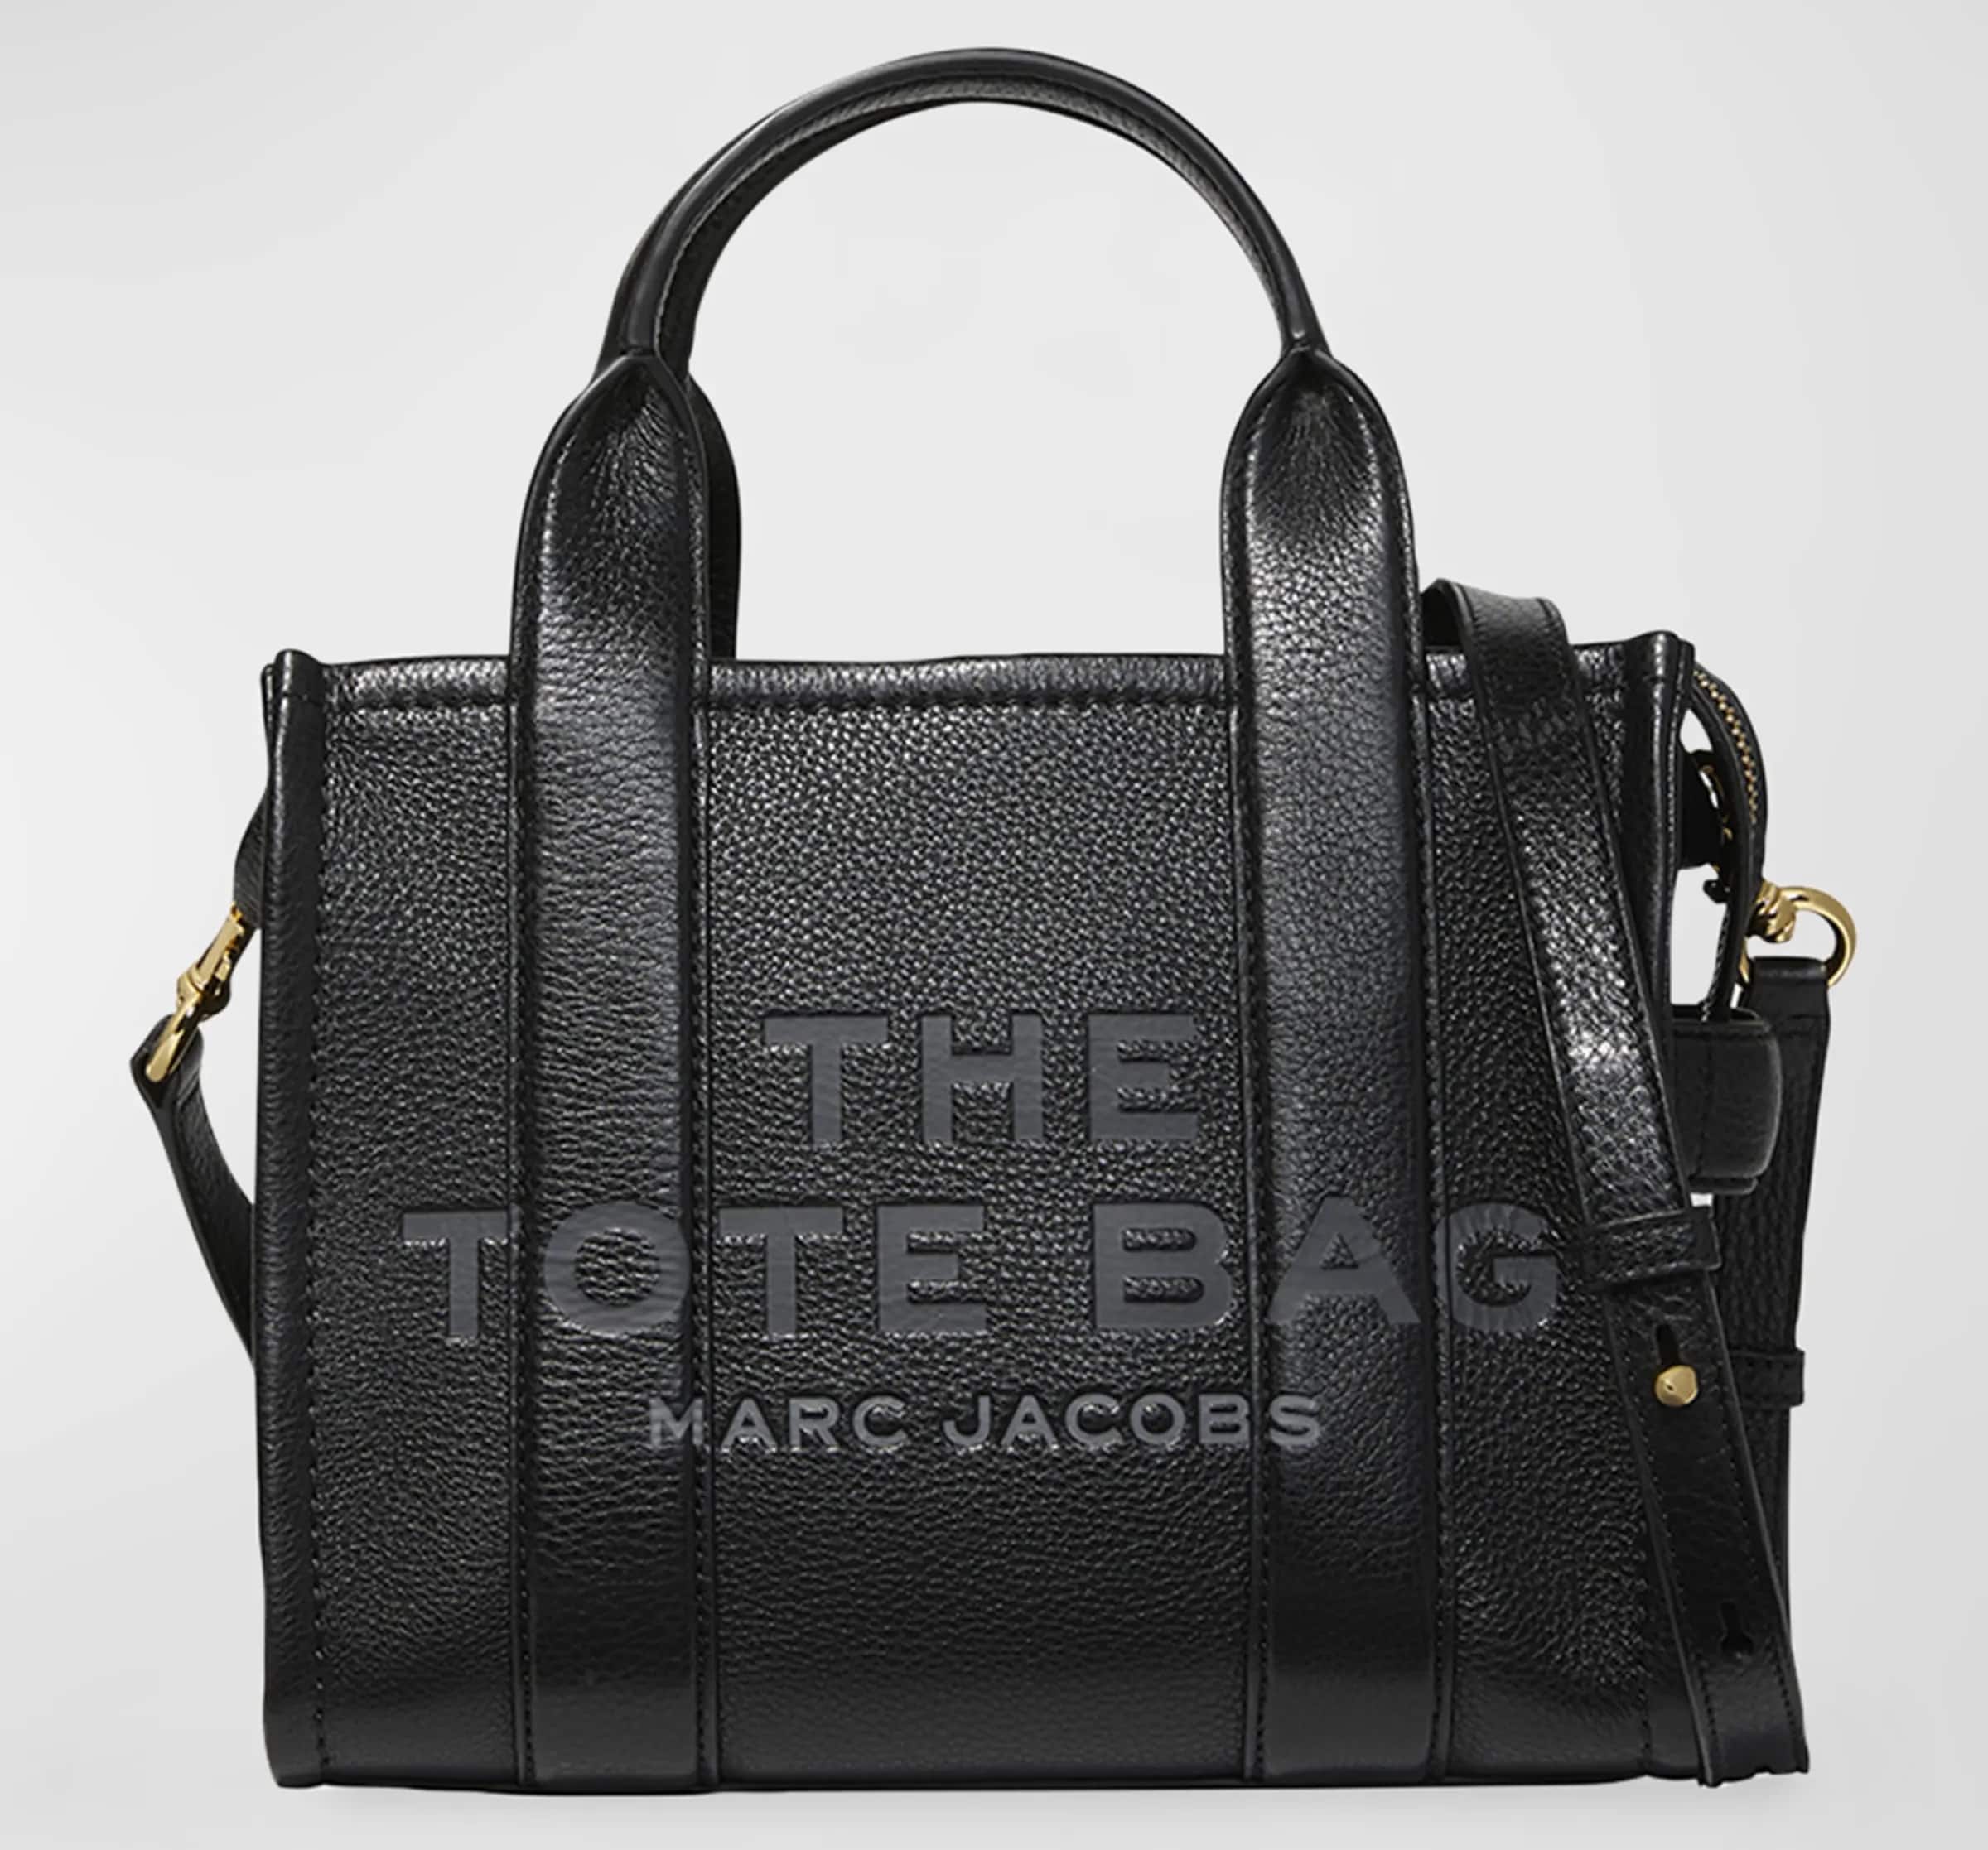 The tote bag small marc jacobs